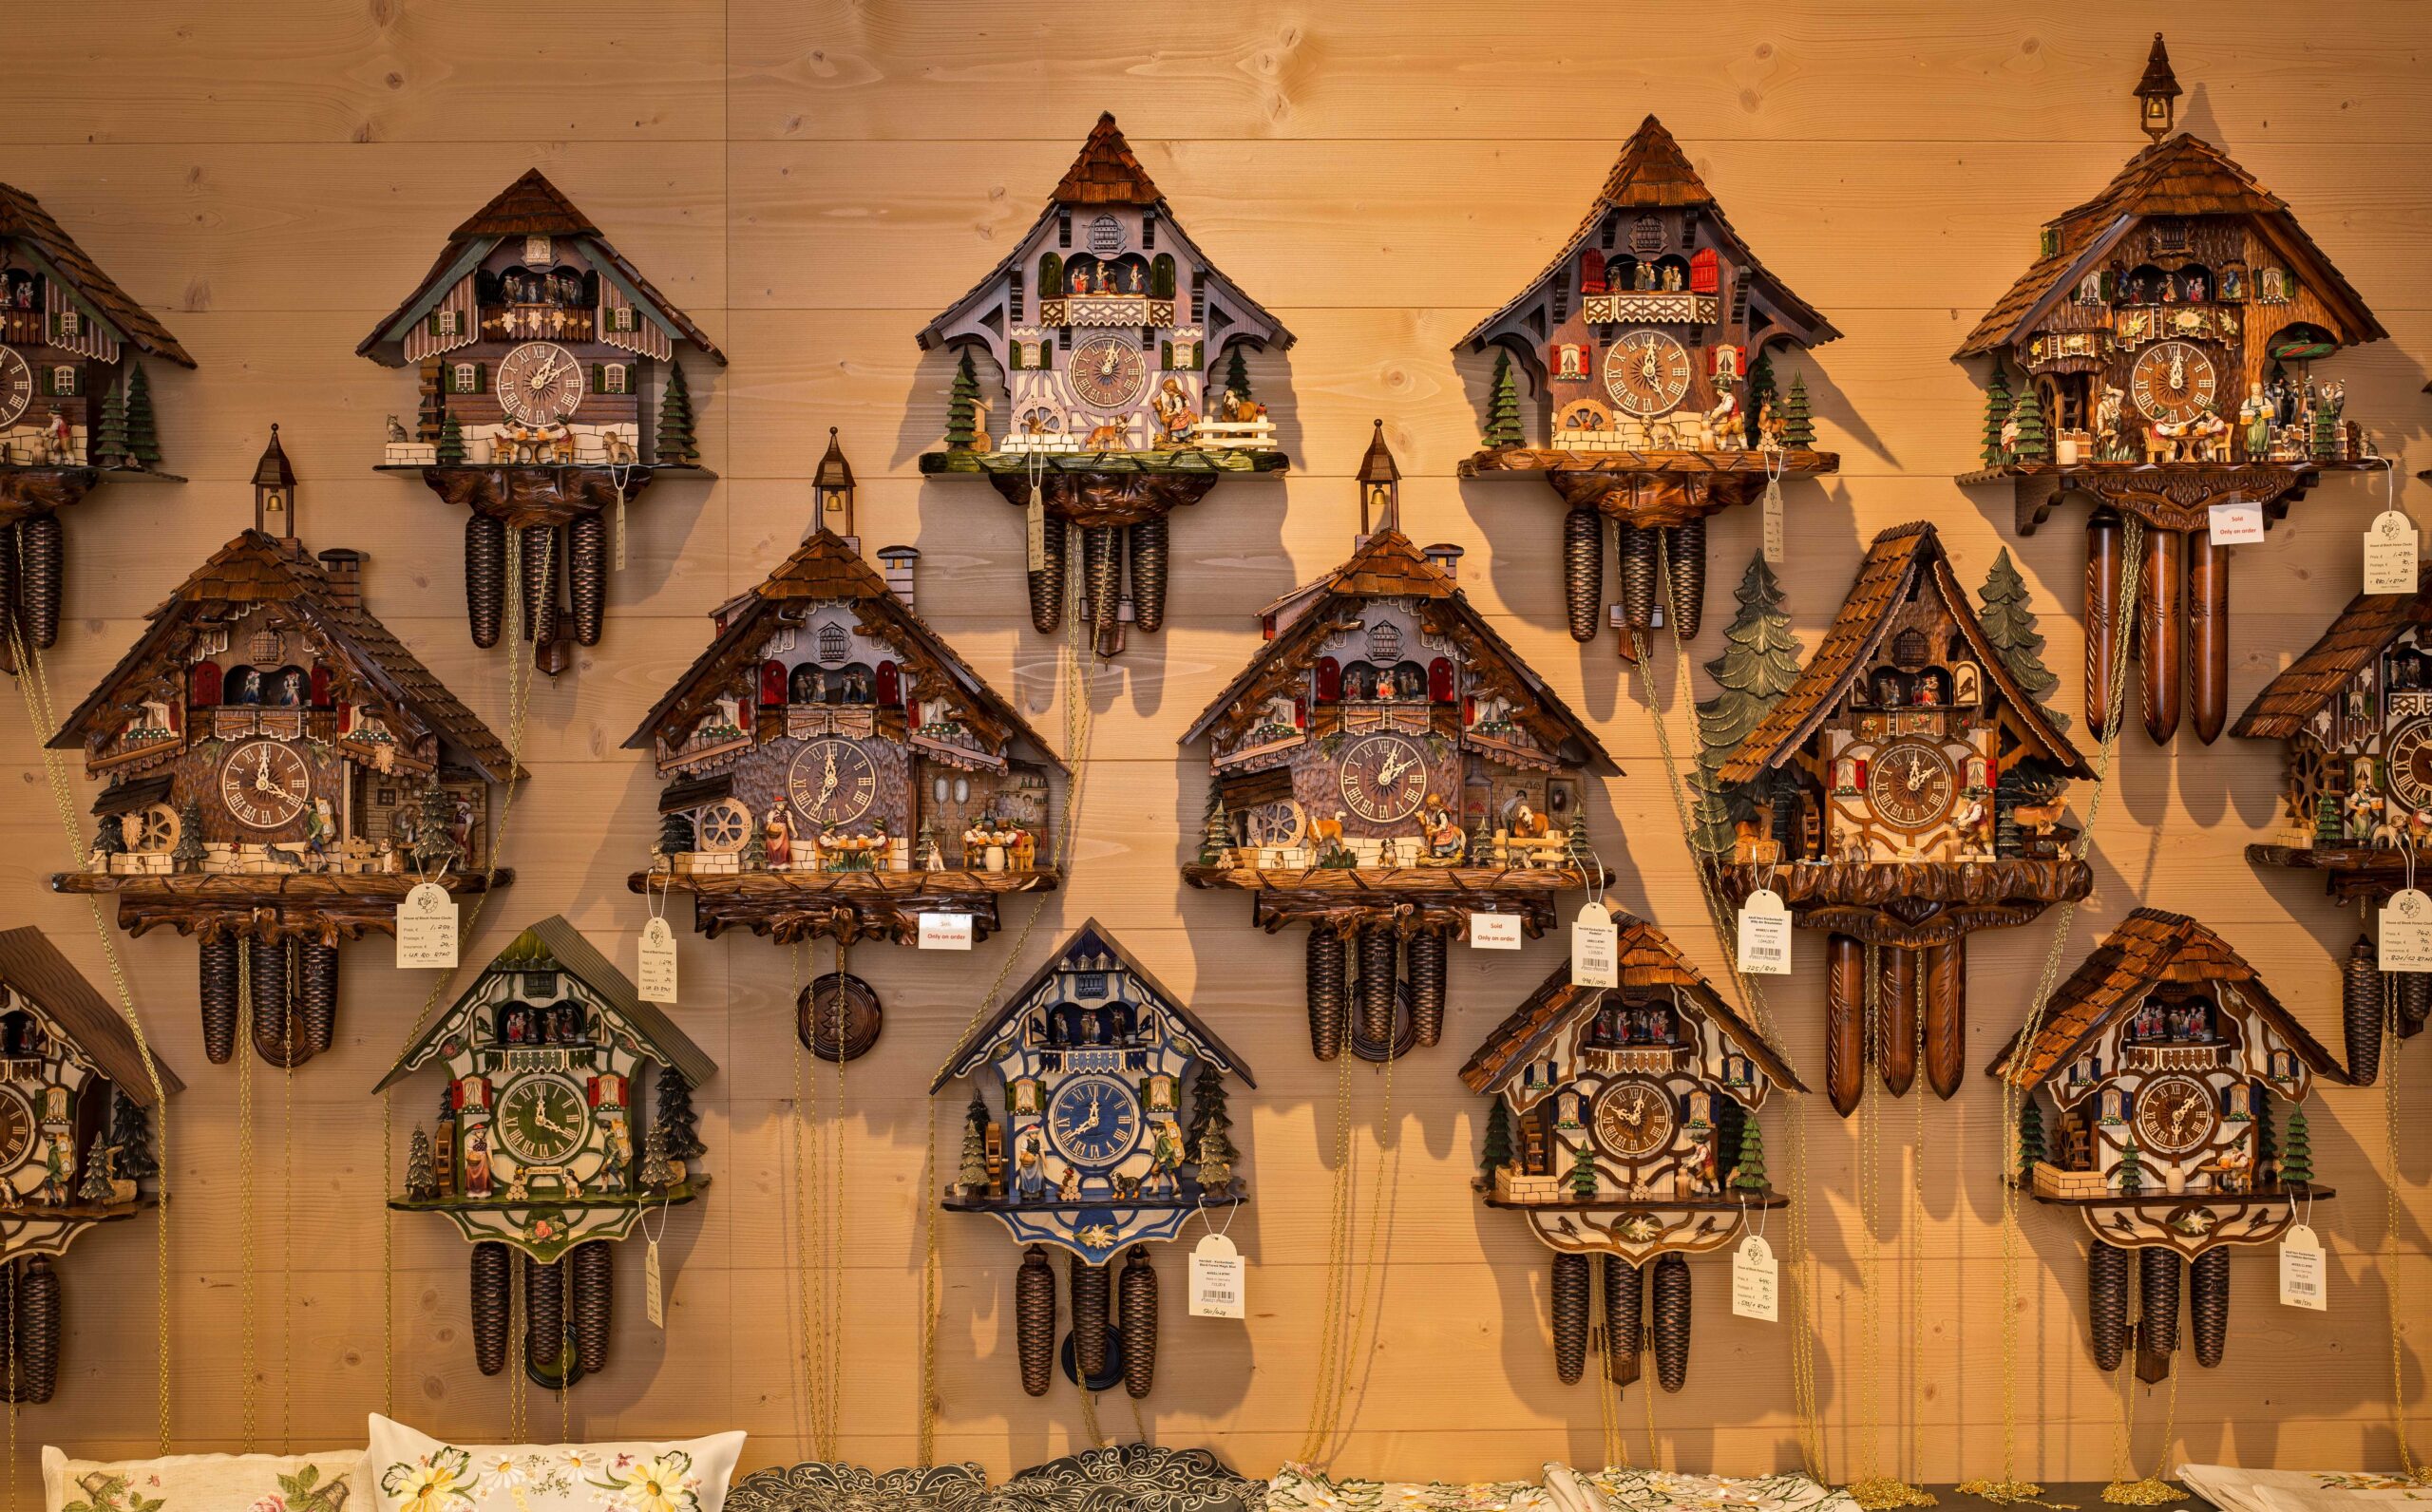 Making time: in conversation with one of Germany’s artisan cuckoo clock makers